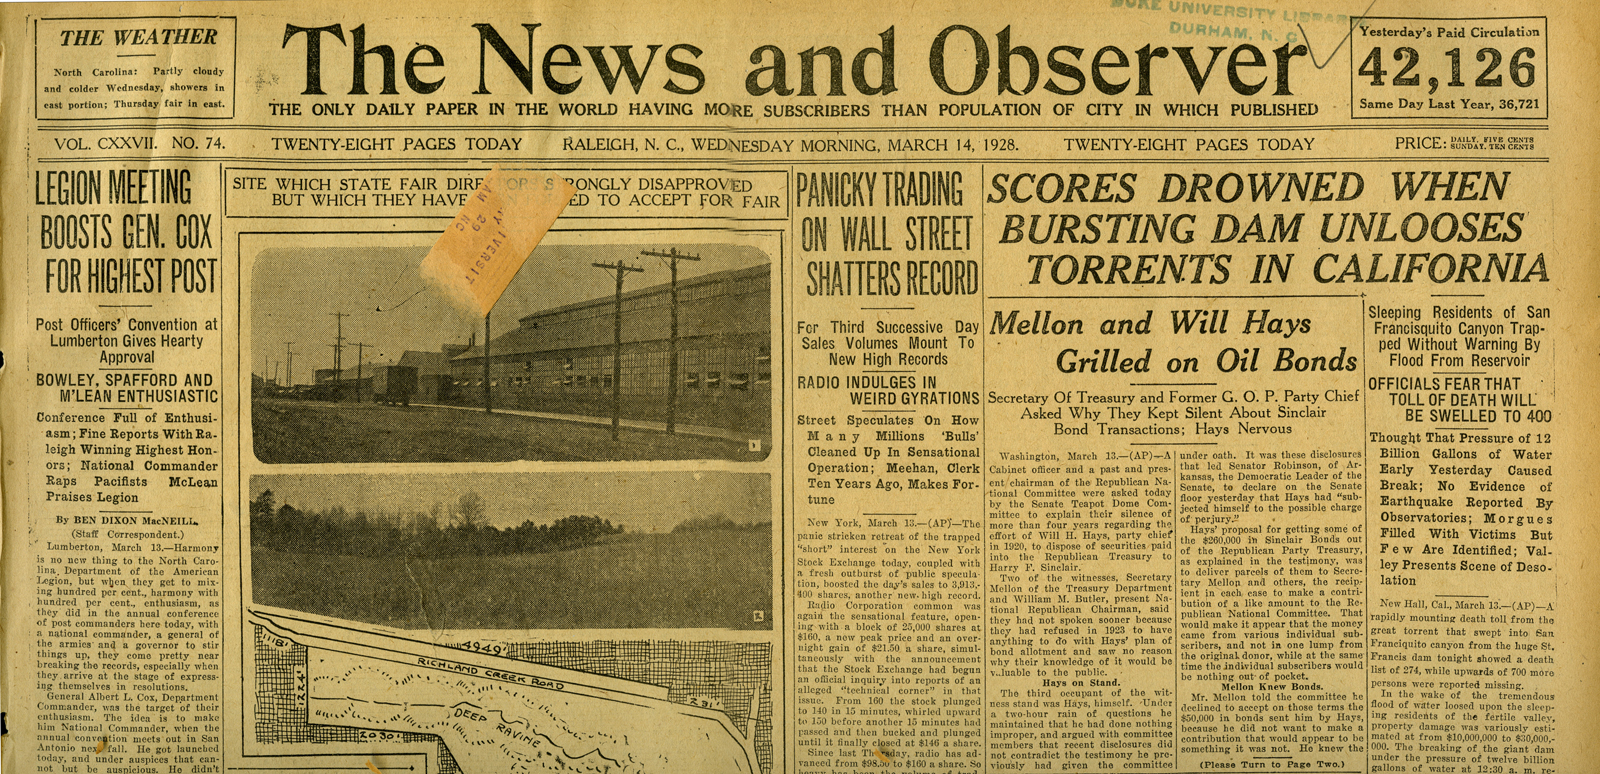 St. Francis Dam Disaster.
THE NEWS AND OBSERVER (NEWSPAPER),
WEDNESDAY, MARCH 14, 1928